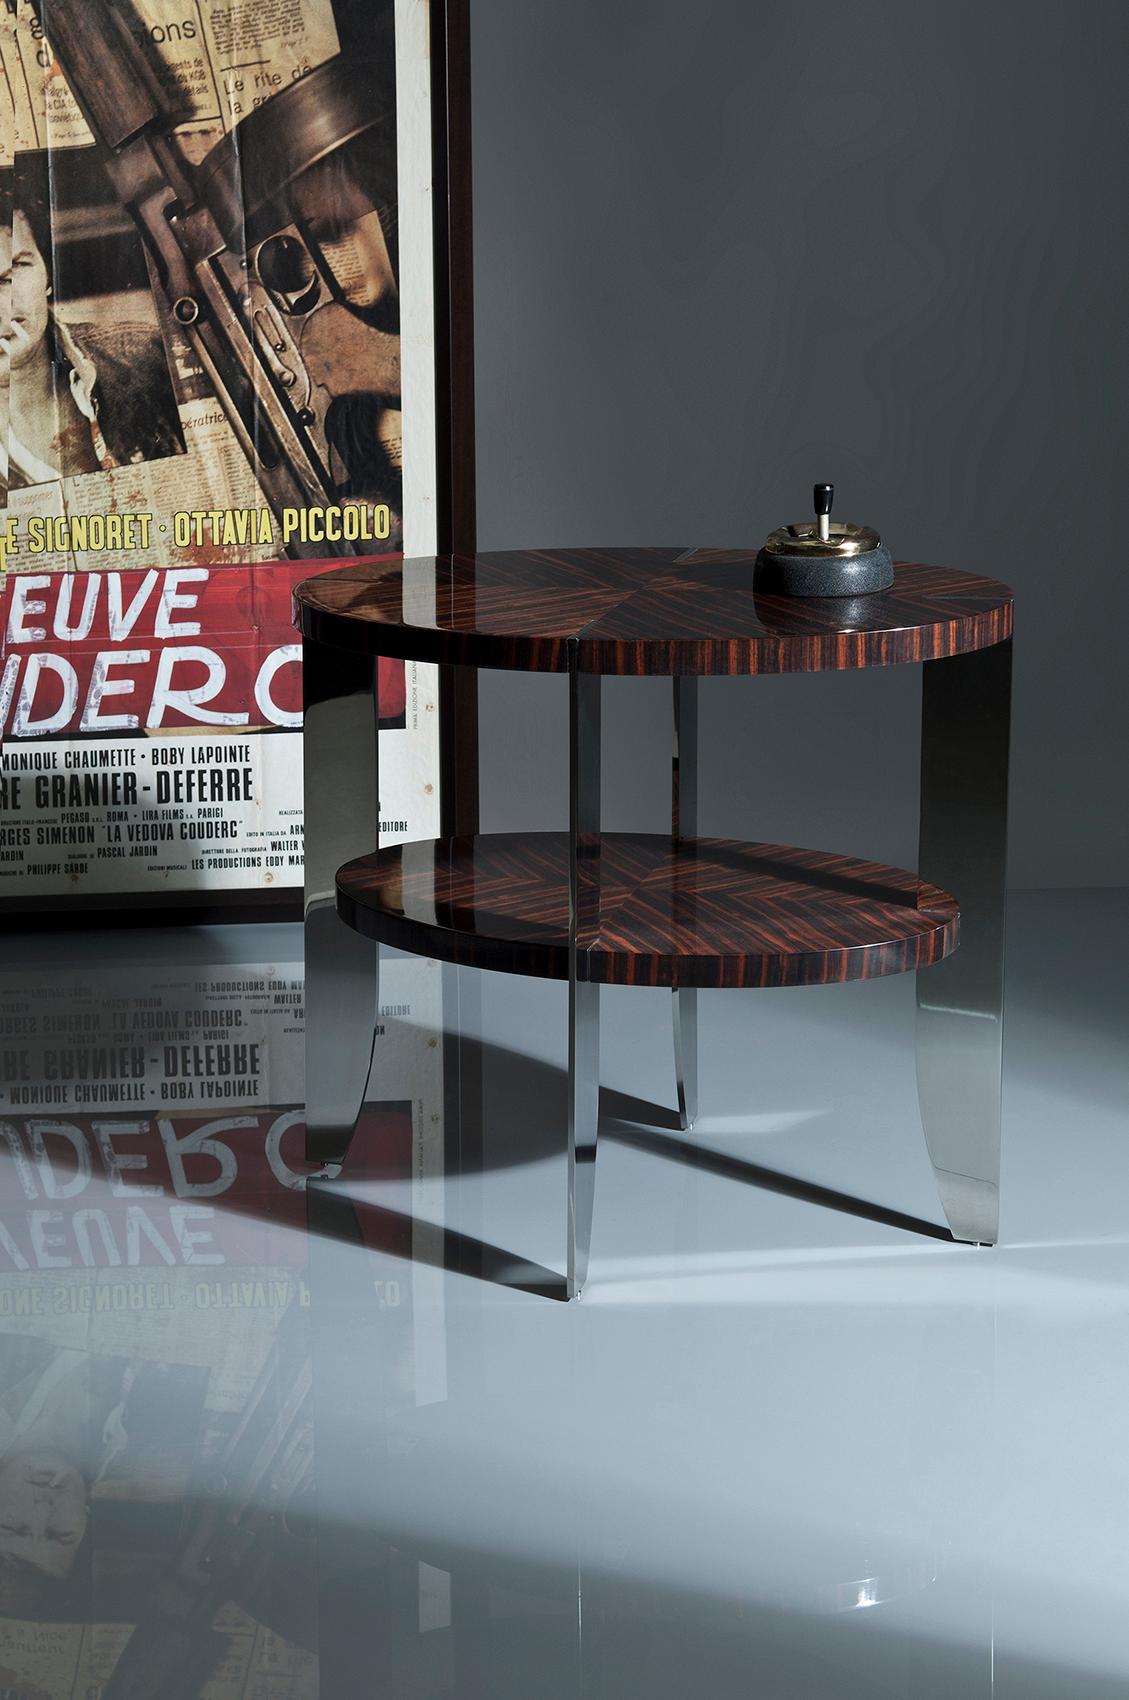 A more slender version of the Eclipse coffee table, but with the same steel/wood trademark junction detail.
Top and shelf in natural macassar 100% gloss
Legs in polished stainless steel.

